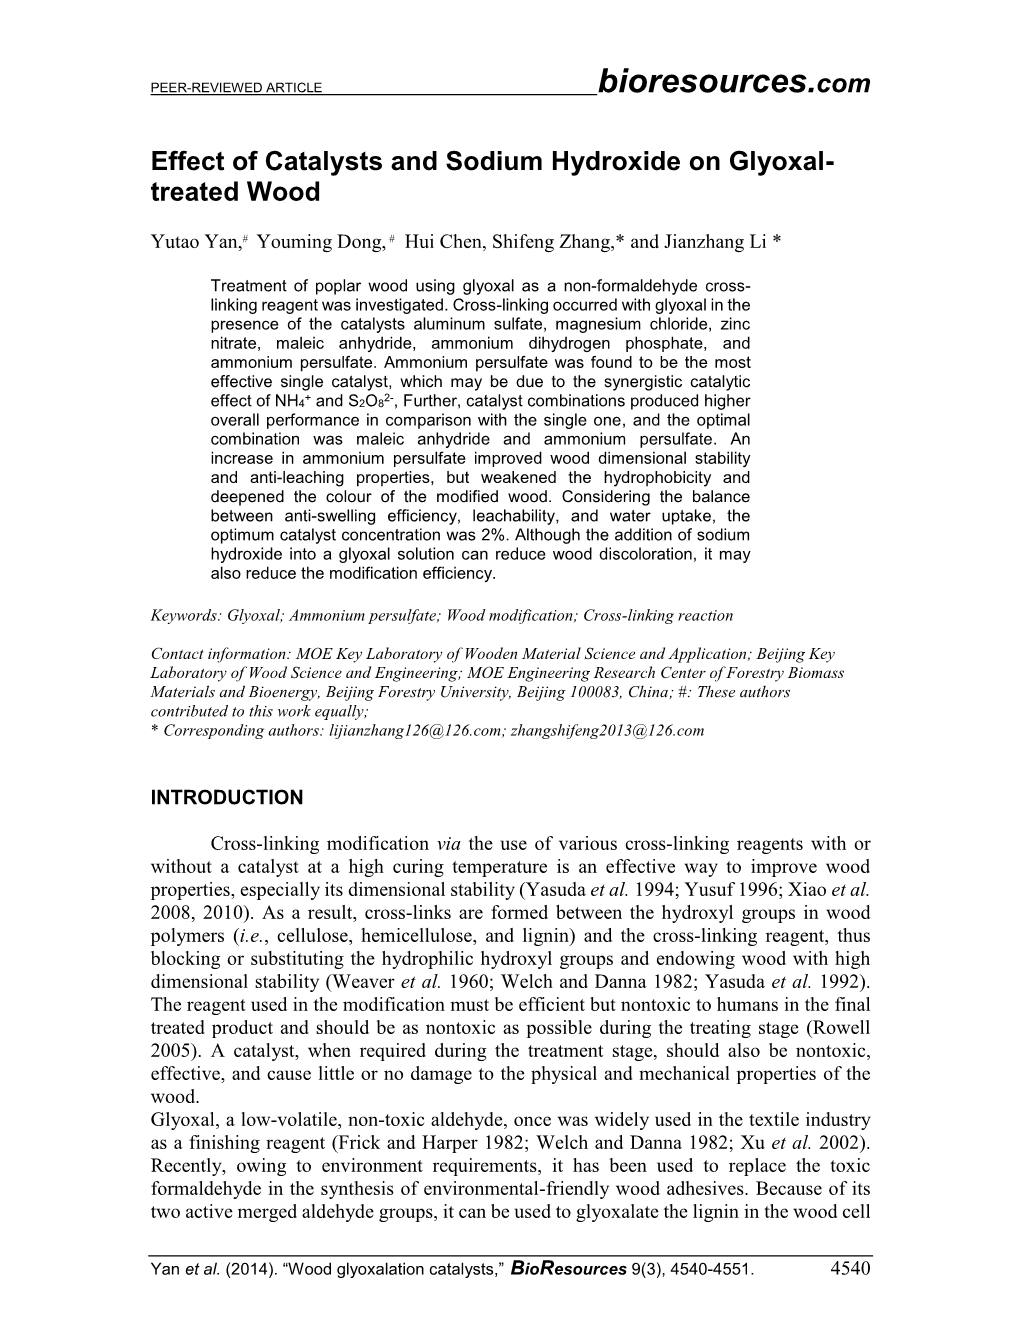 Effect of Catalysts and Sodium Hydroxide on Glyoxal- Treated Wood